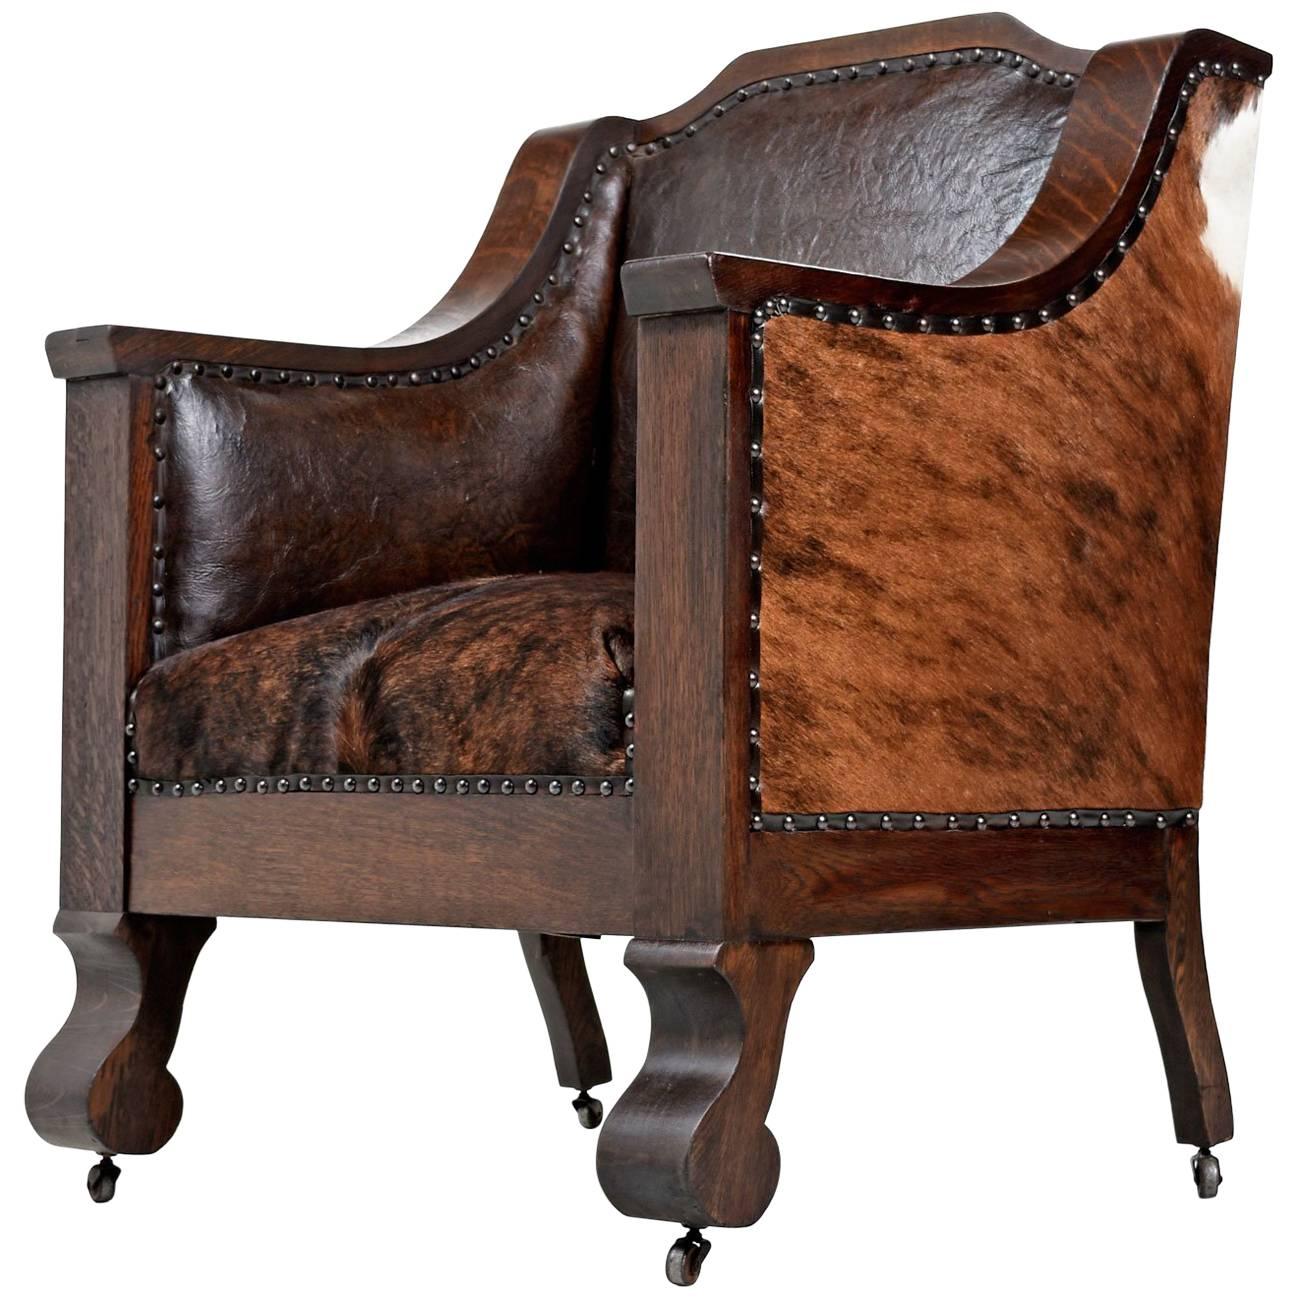 Early 1800s Handmade Empire Style Leather Thrown Chair Re-Invented in Cowhide